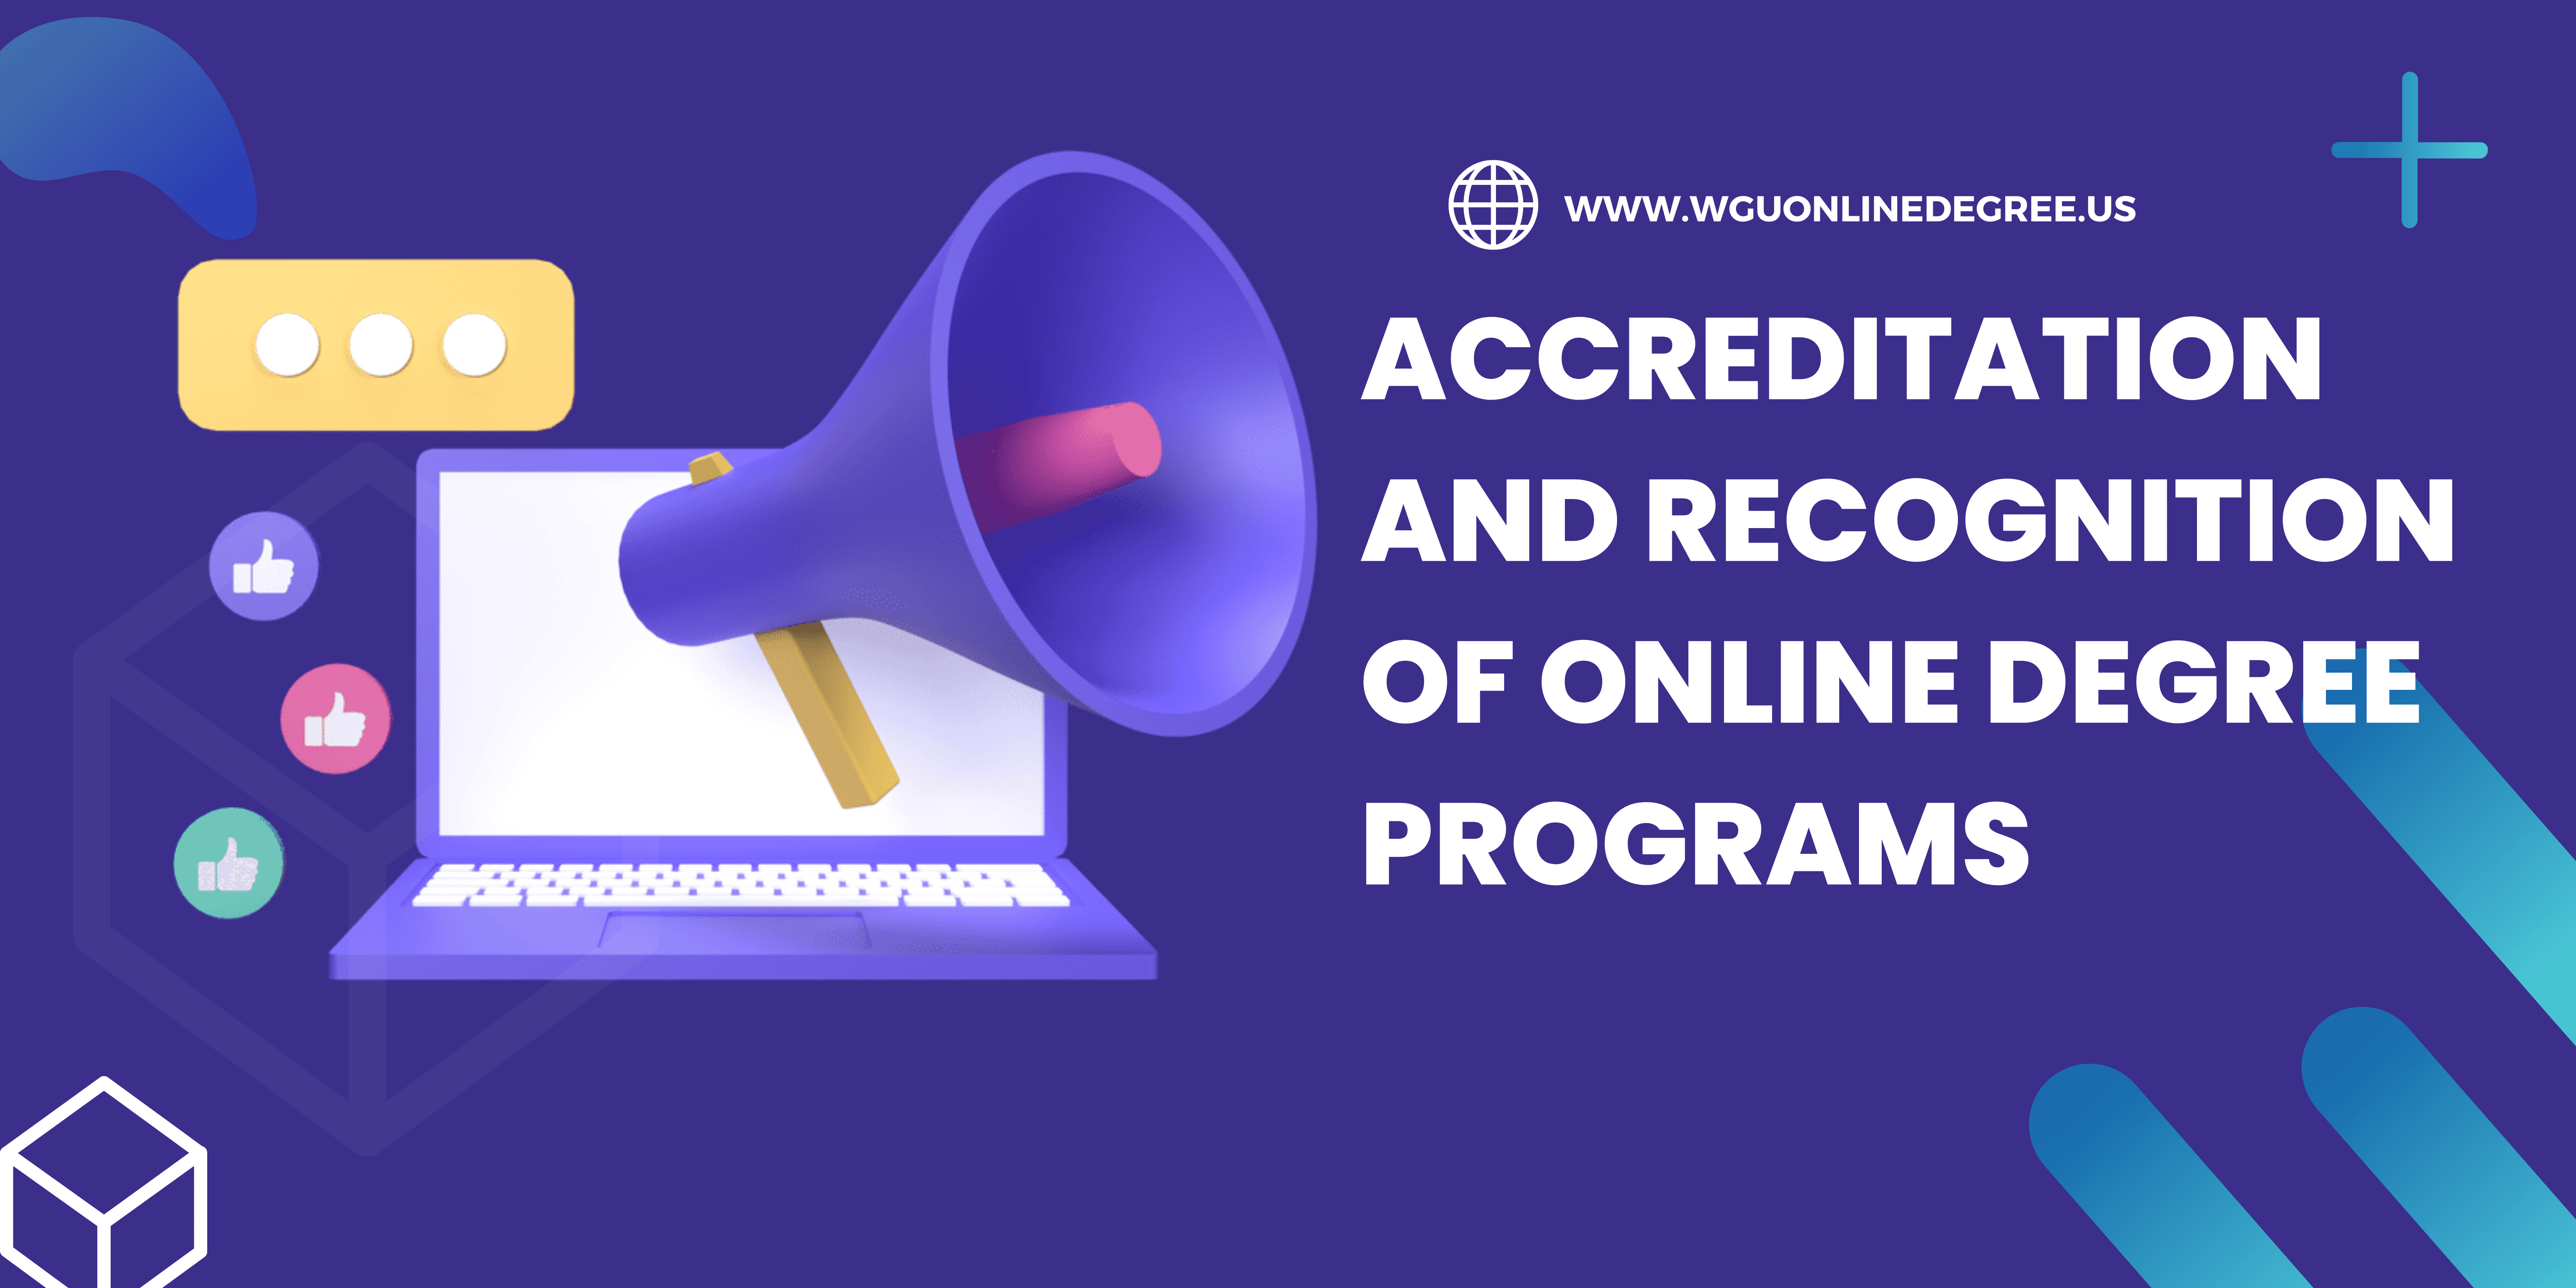 Accreditation and Recognition of Online Degree Programs